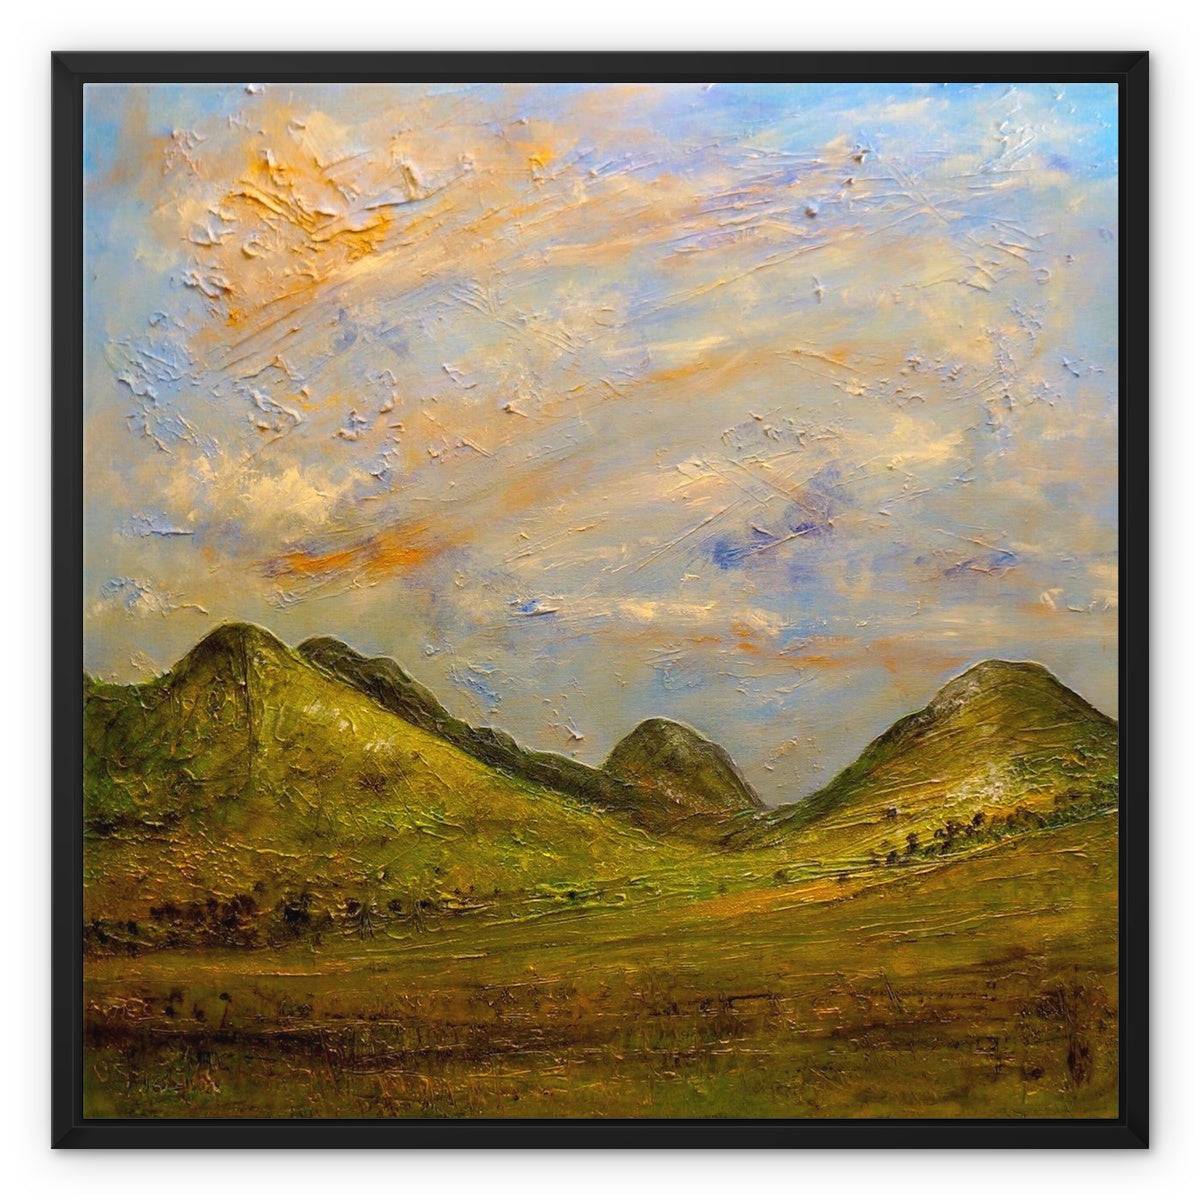 Glencoe Summer Painting | Framed Canvas From Scotland-Floating Framed Canvas Prints-Glencoe Art Gallery-24"x24"-Black Frame-Paintings, Prints, Homeware, Art Gifts From Scotland By Scottish Artist Kevin Hunter